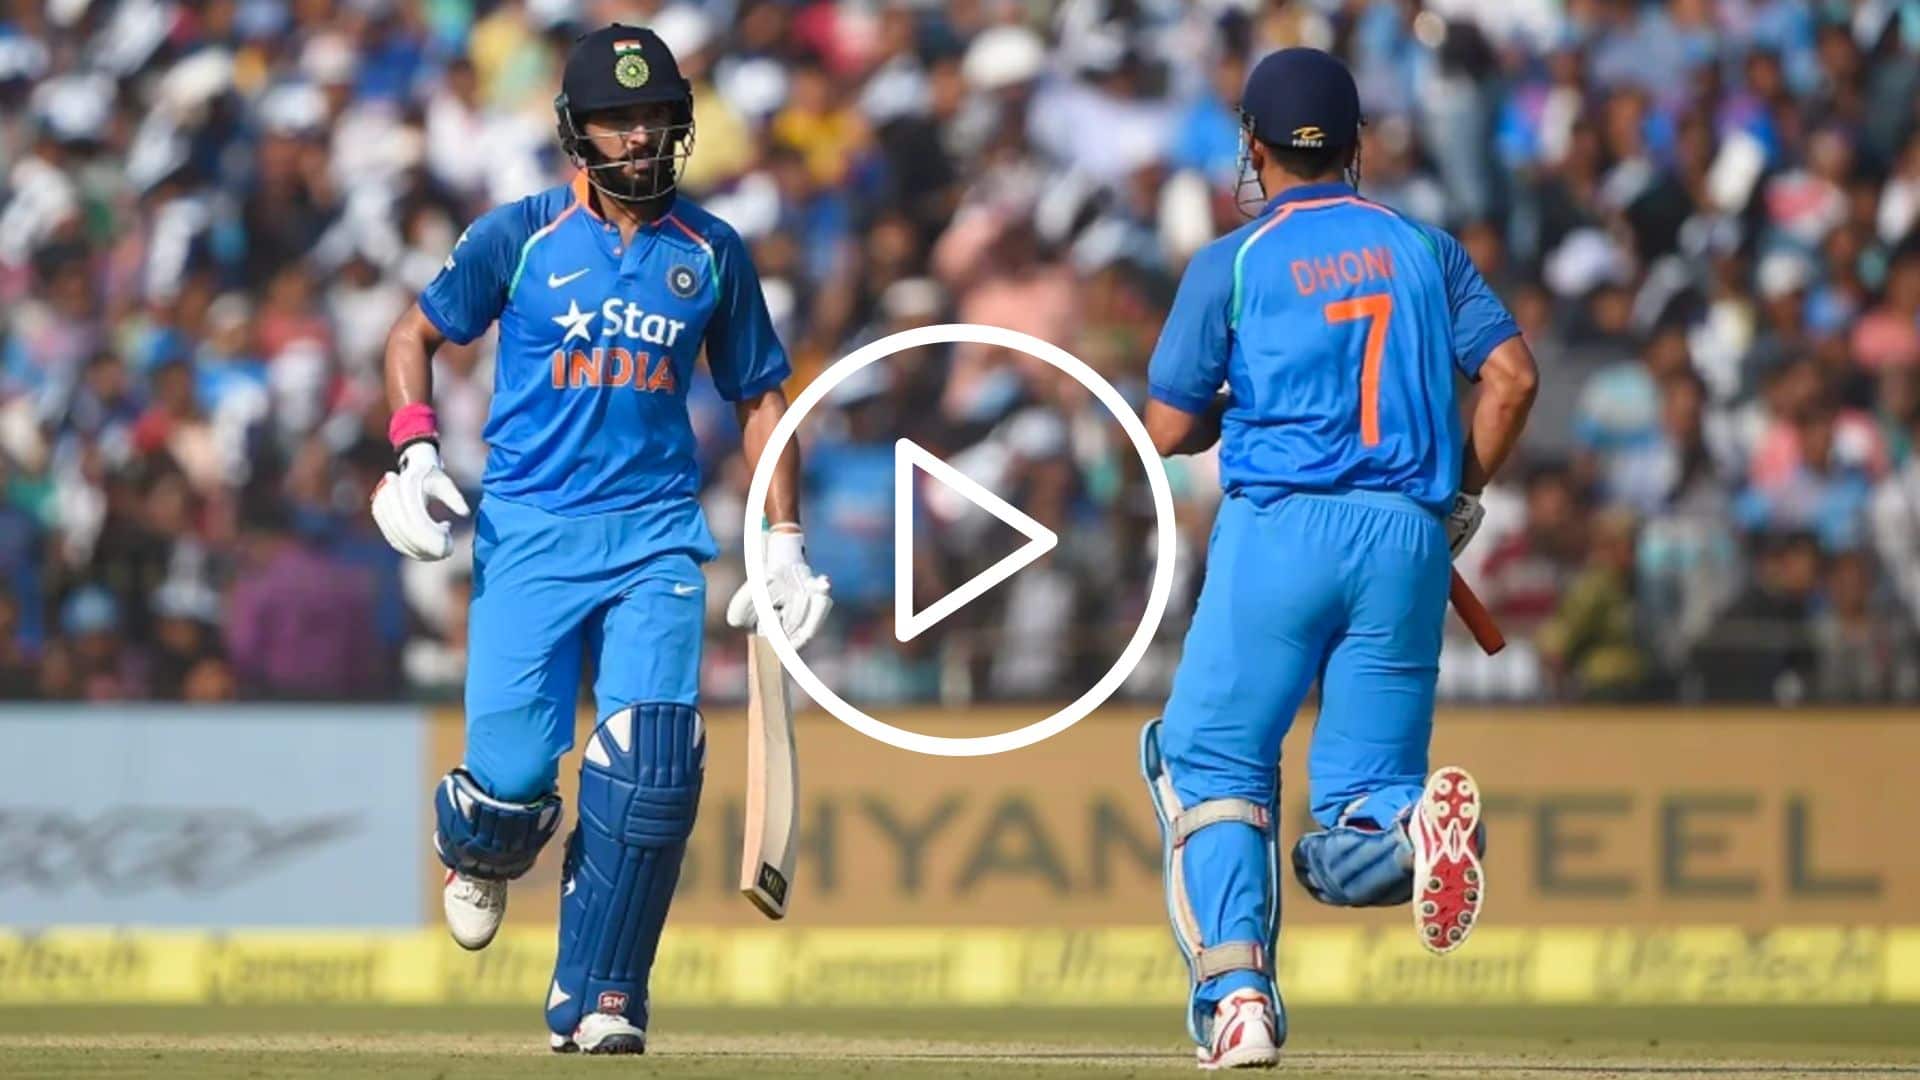 [Watch] When MS Dhoni, Yuvraj Singh Made Their Final Centuries For India Together